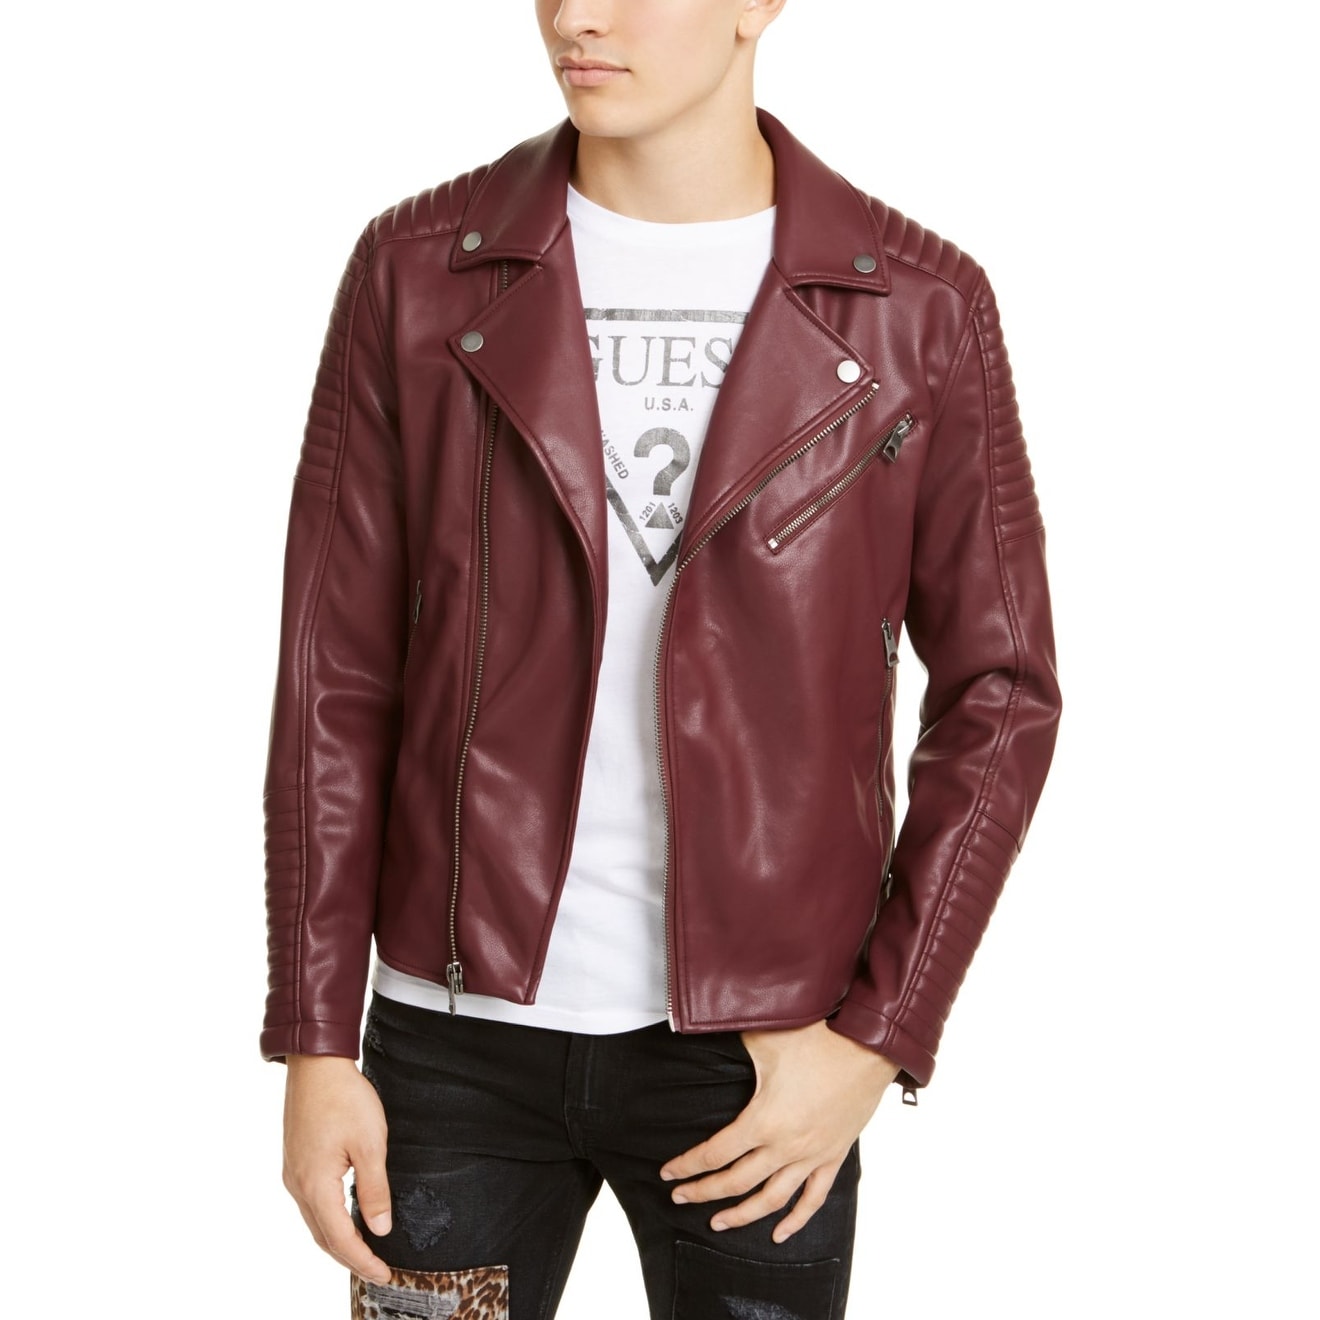 guess leather jacket mens